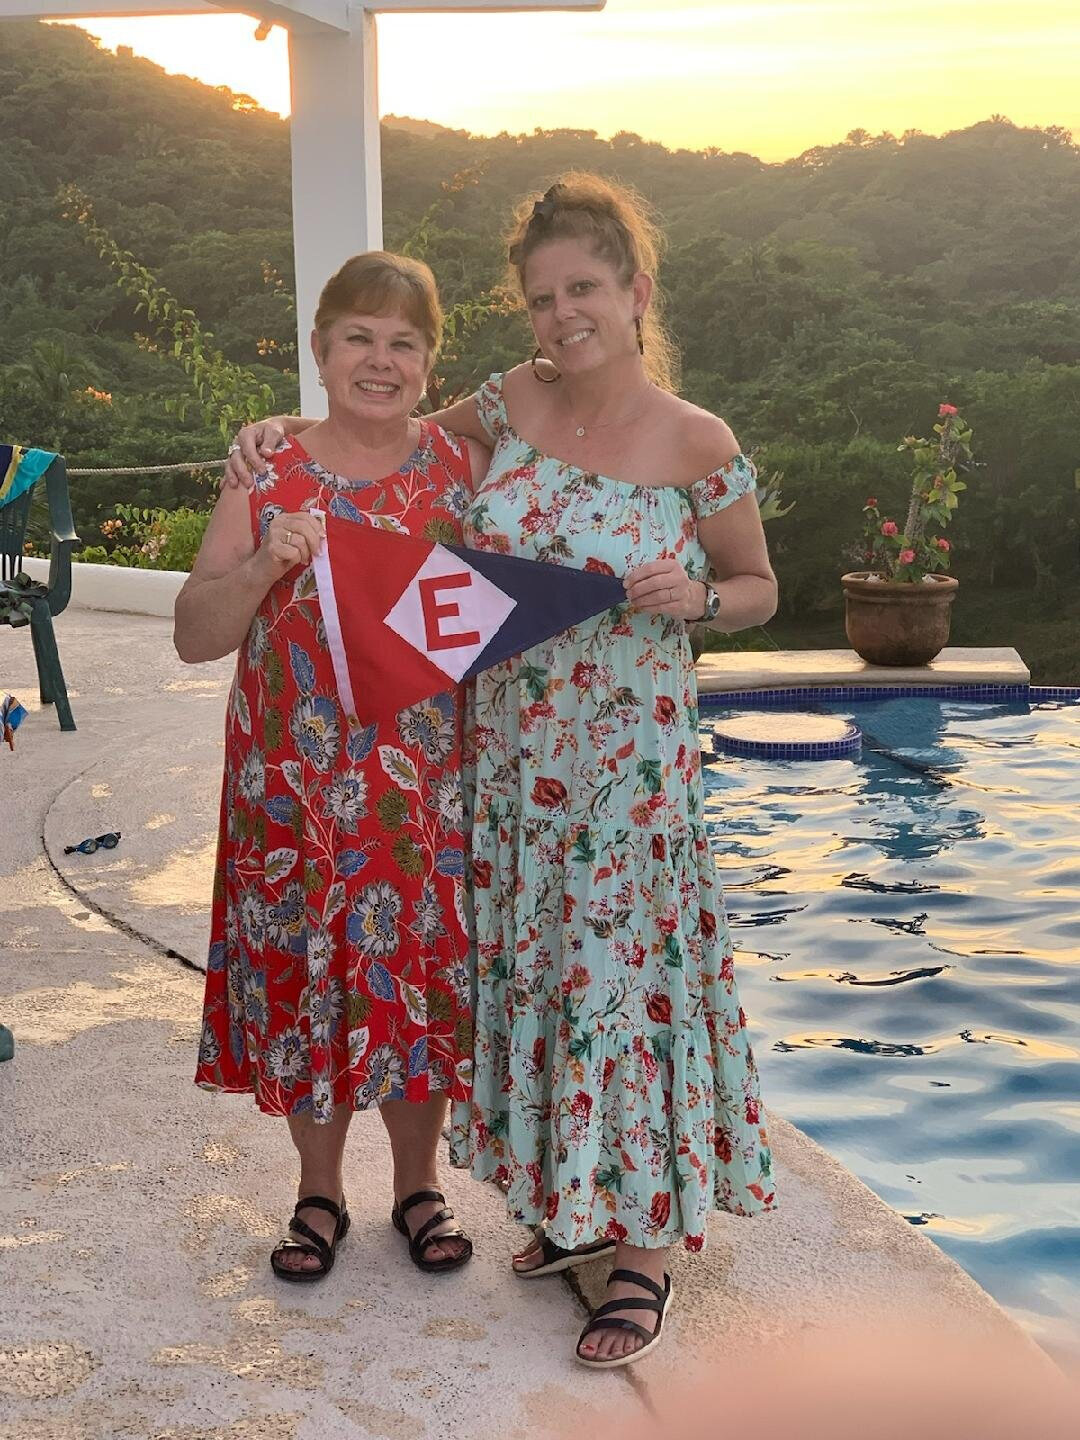  Susan and Katie show their EYC pride while relaxing in Mexico 